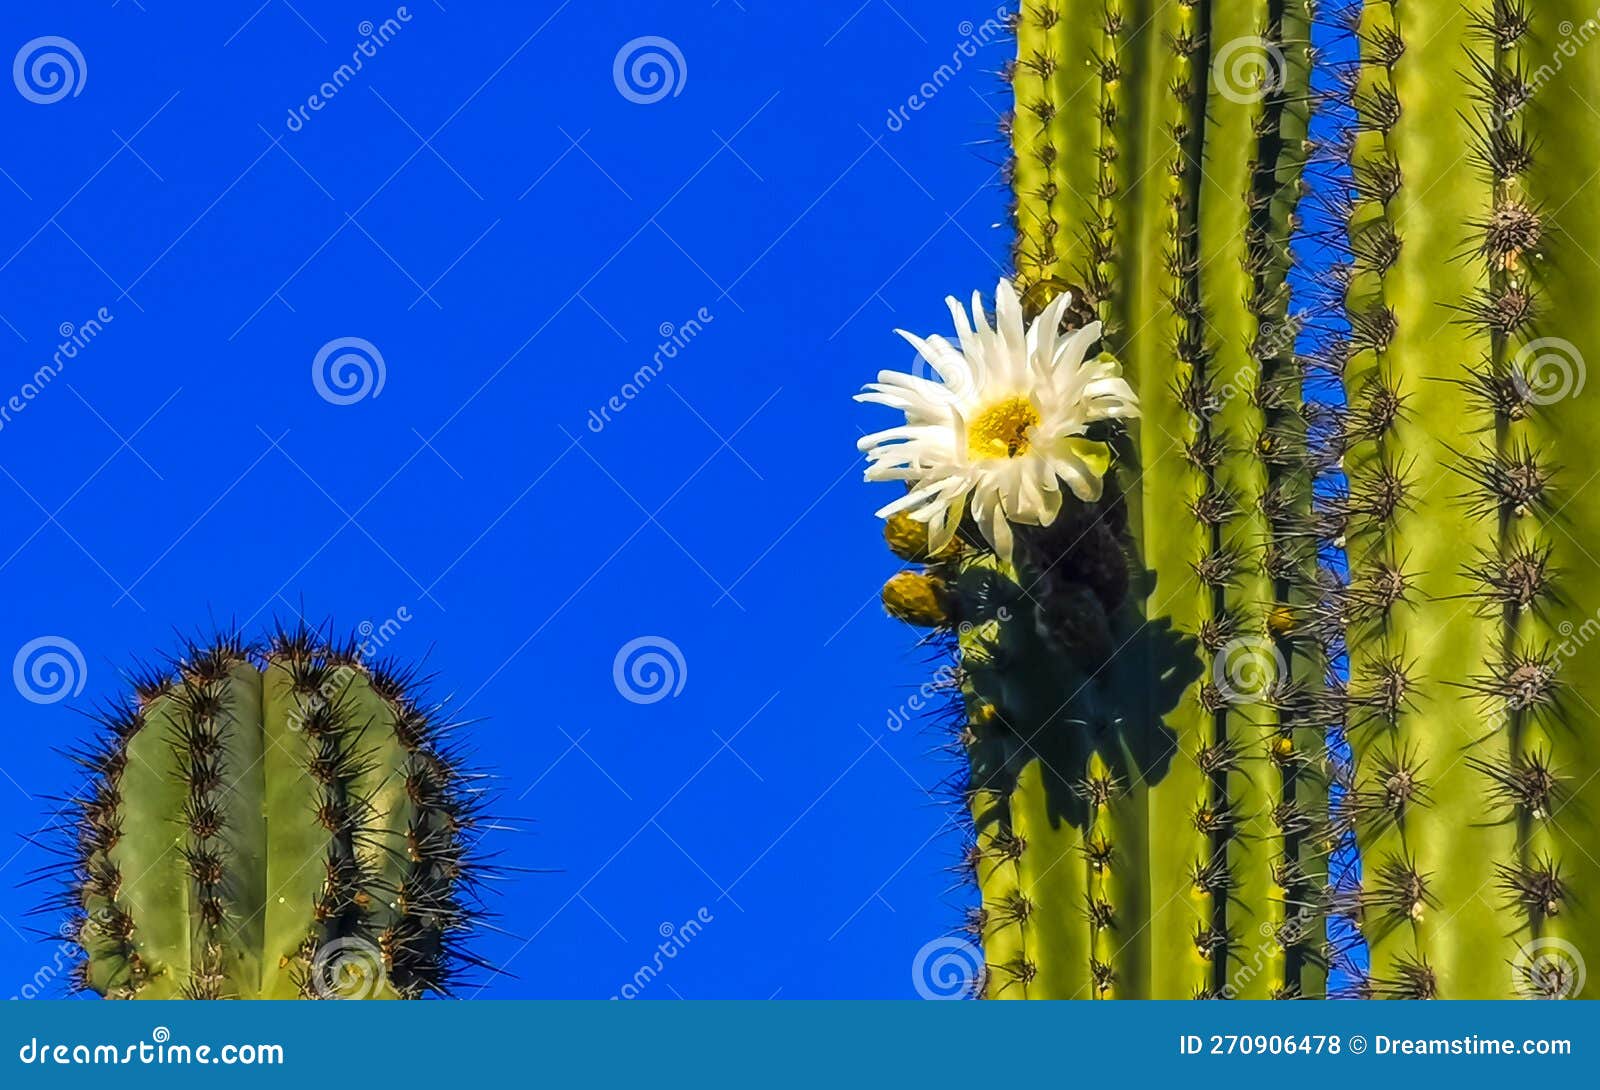 Tropical Cacti Cactus Plants with White Flower Blossom Mexico Stock ...